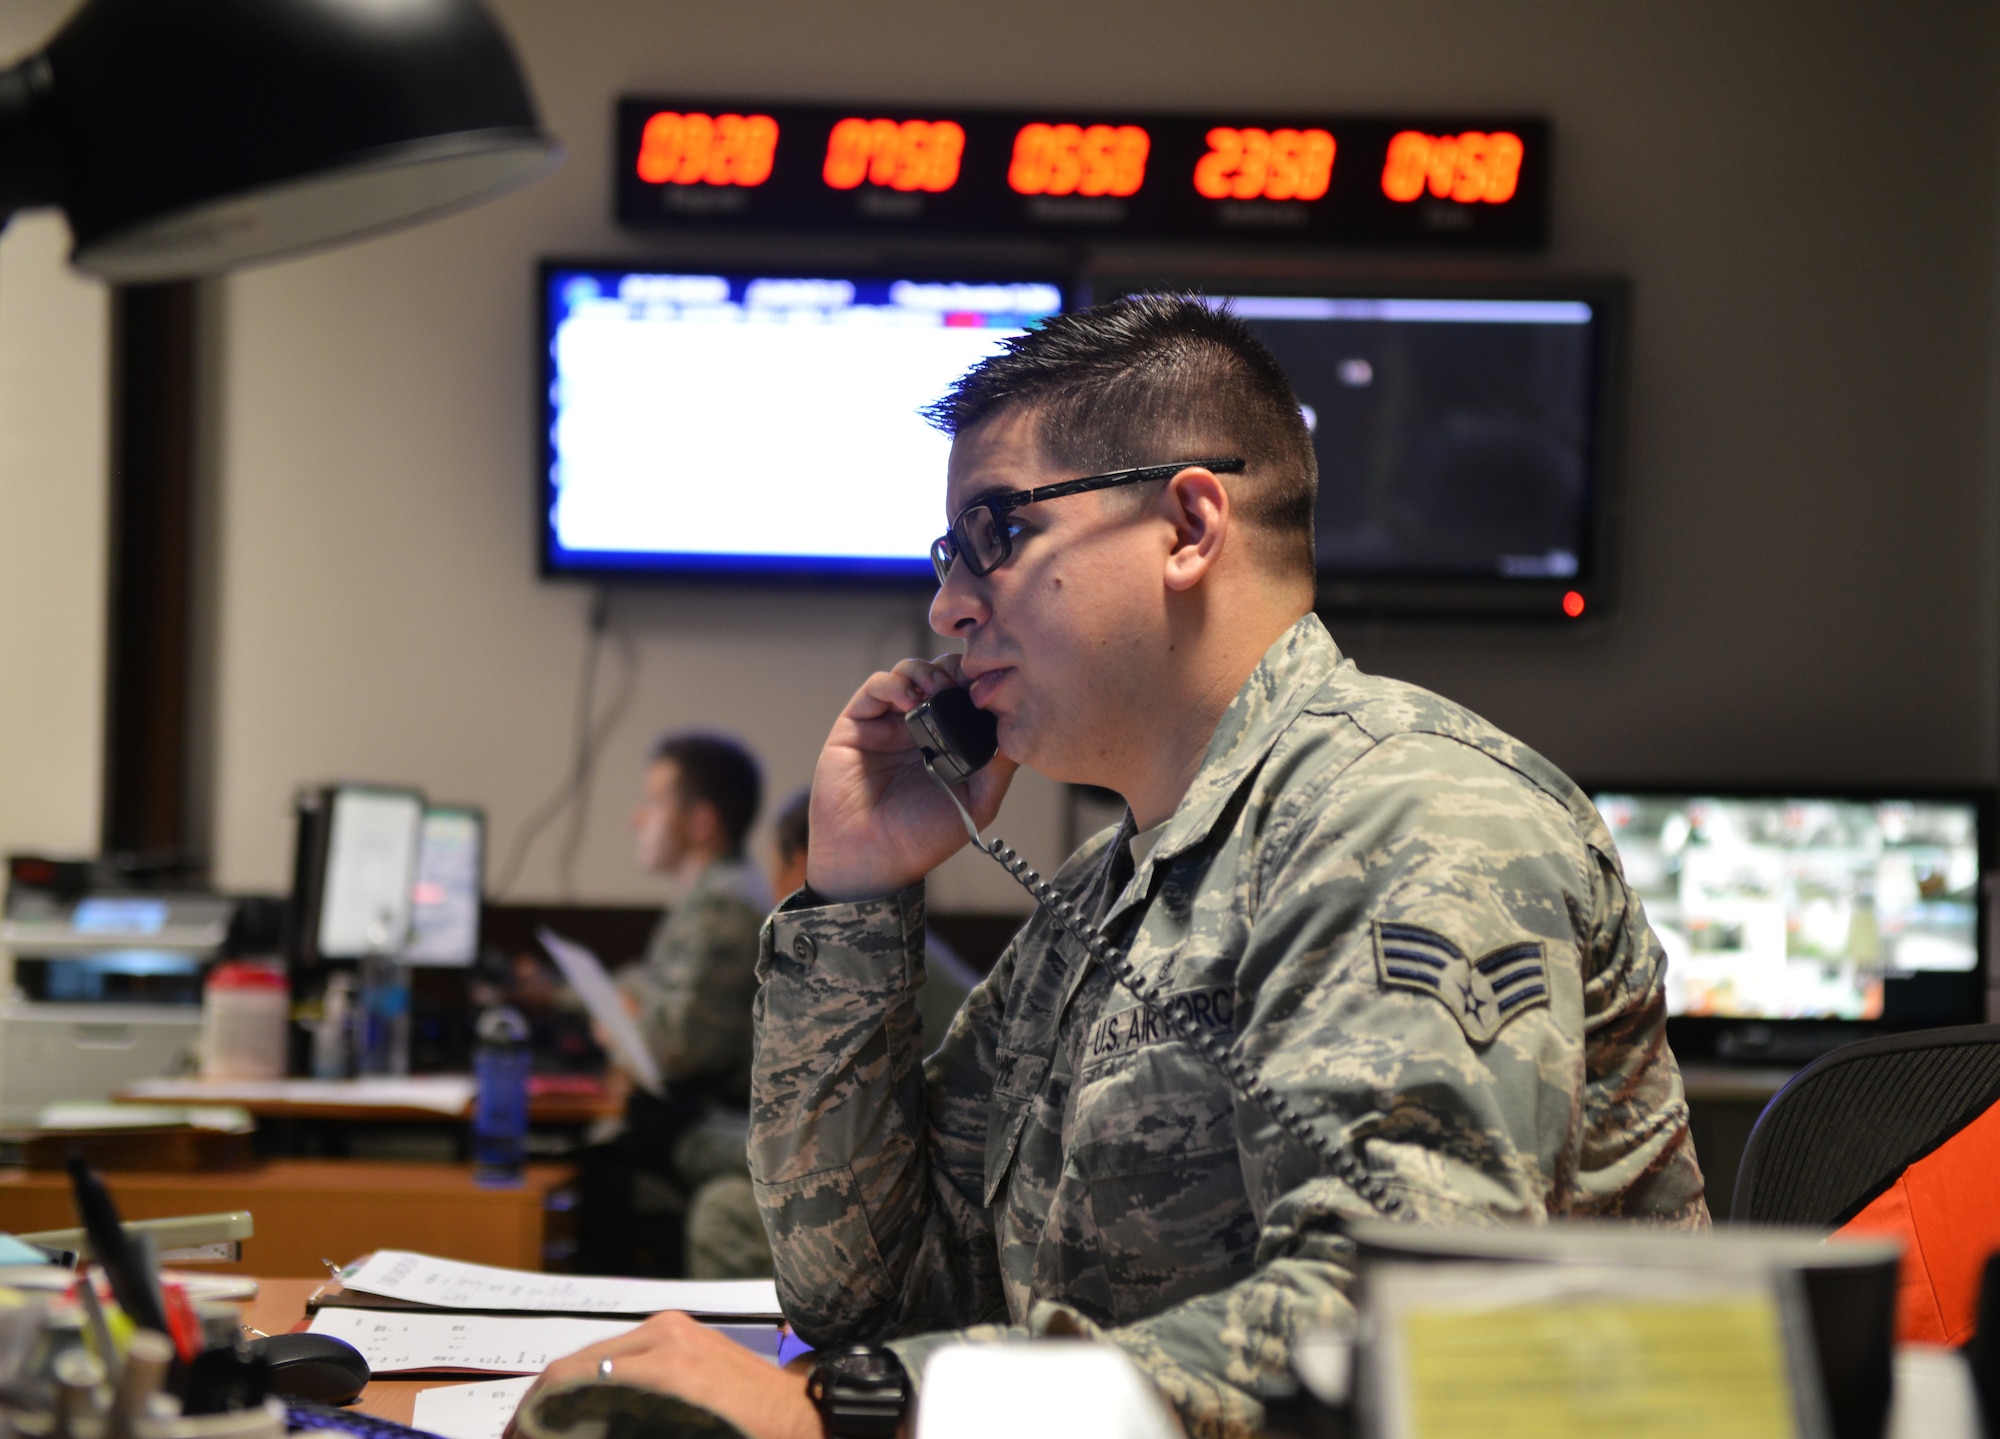 Senior Airman Michael Fromme, Contingency Aeromedical Staging Facility medical technician, makes a phone call in the early morning for an outbound mission on Ramstein Air Base, Germany, Nov. 20, 2014. Airmen at the CASF ensure those injured down range have a smooth transition back home and into the arms of their loved ones. (U.S. Air Force photo/Senior Airman Hailey Haux)